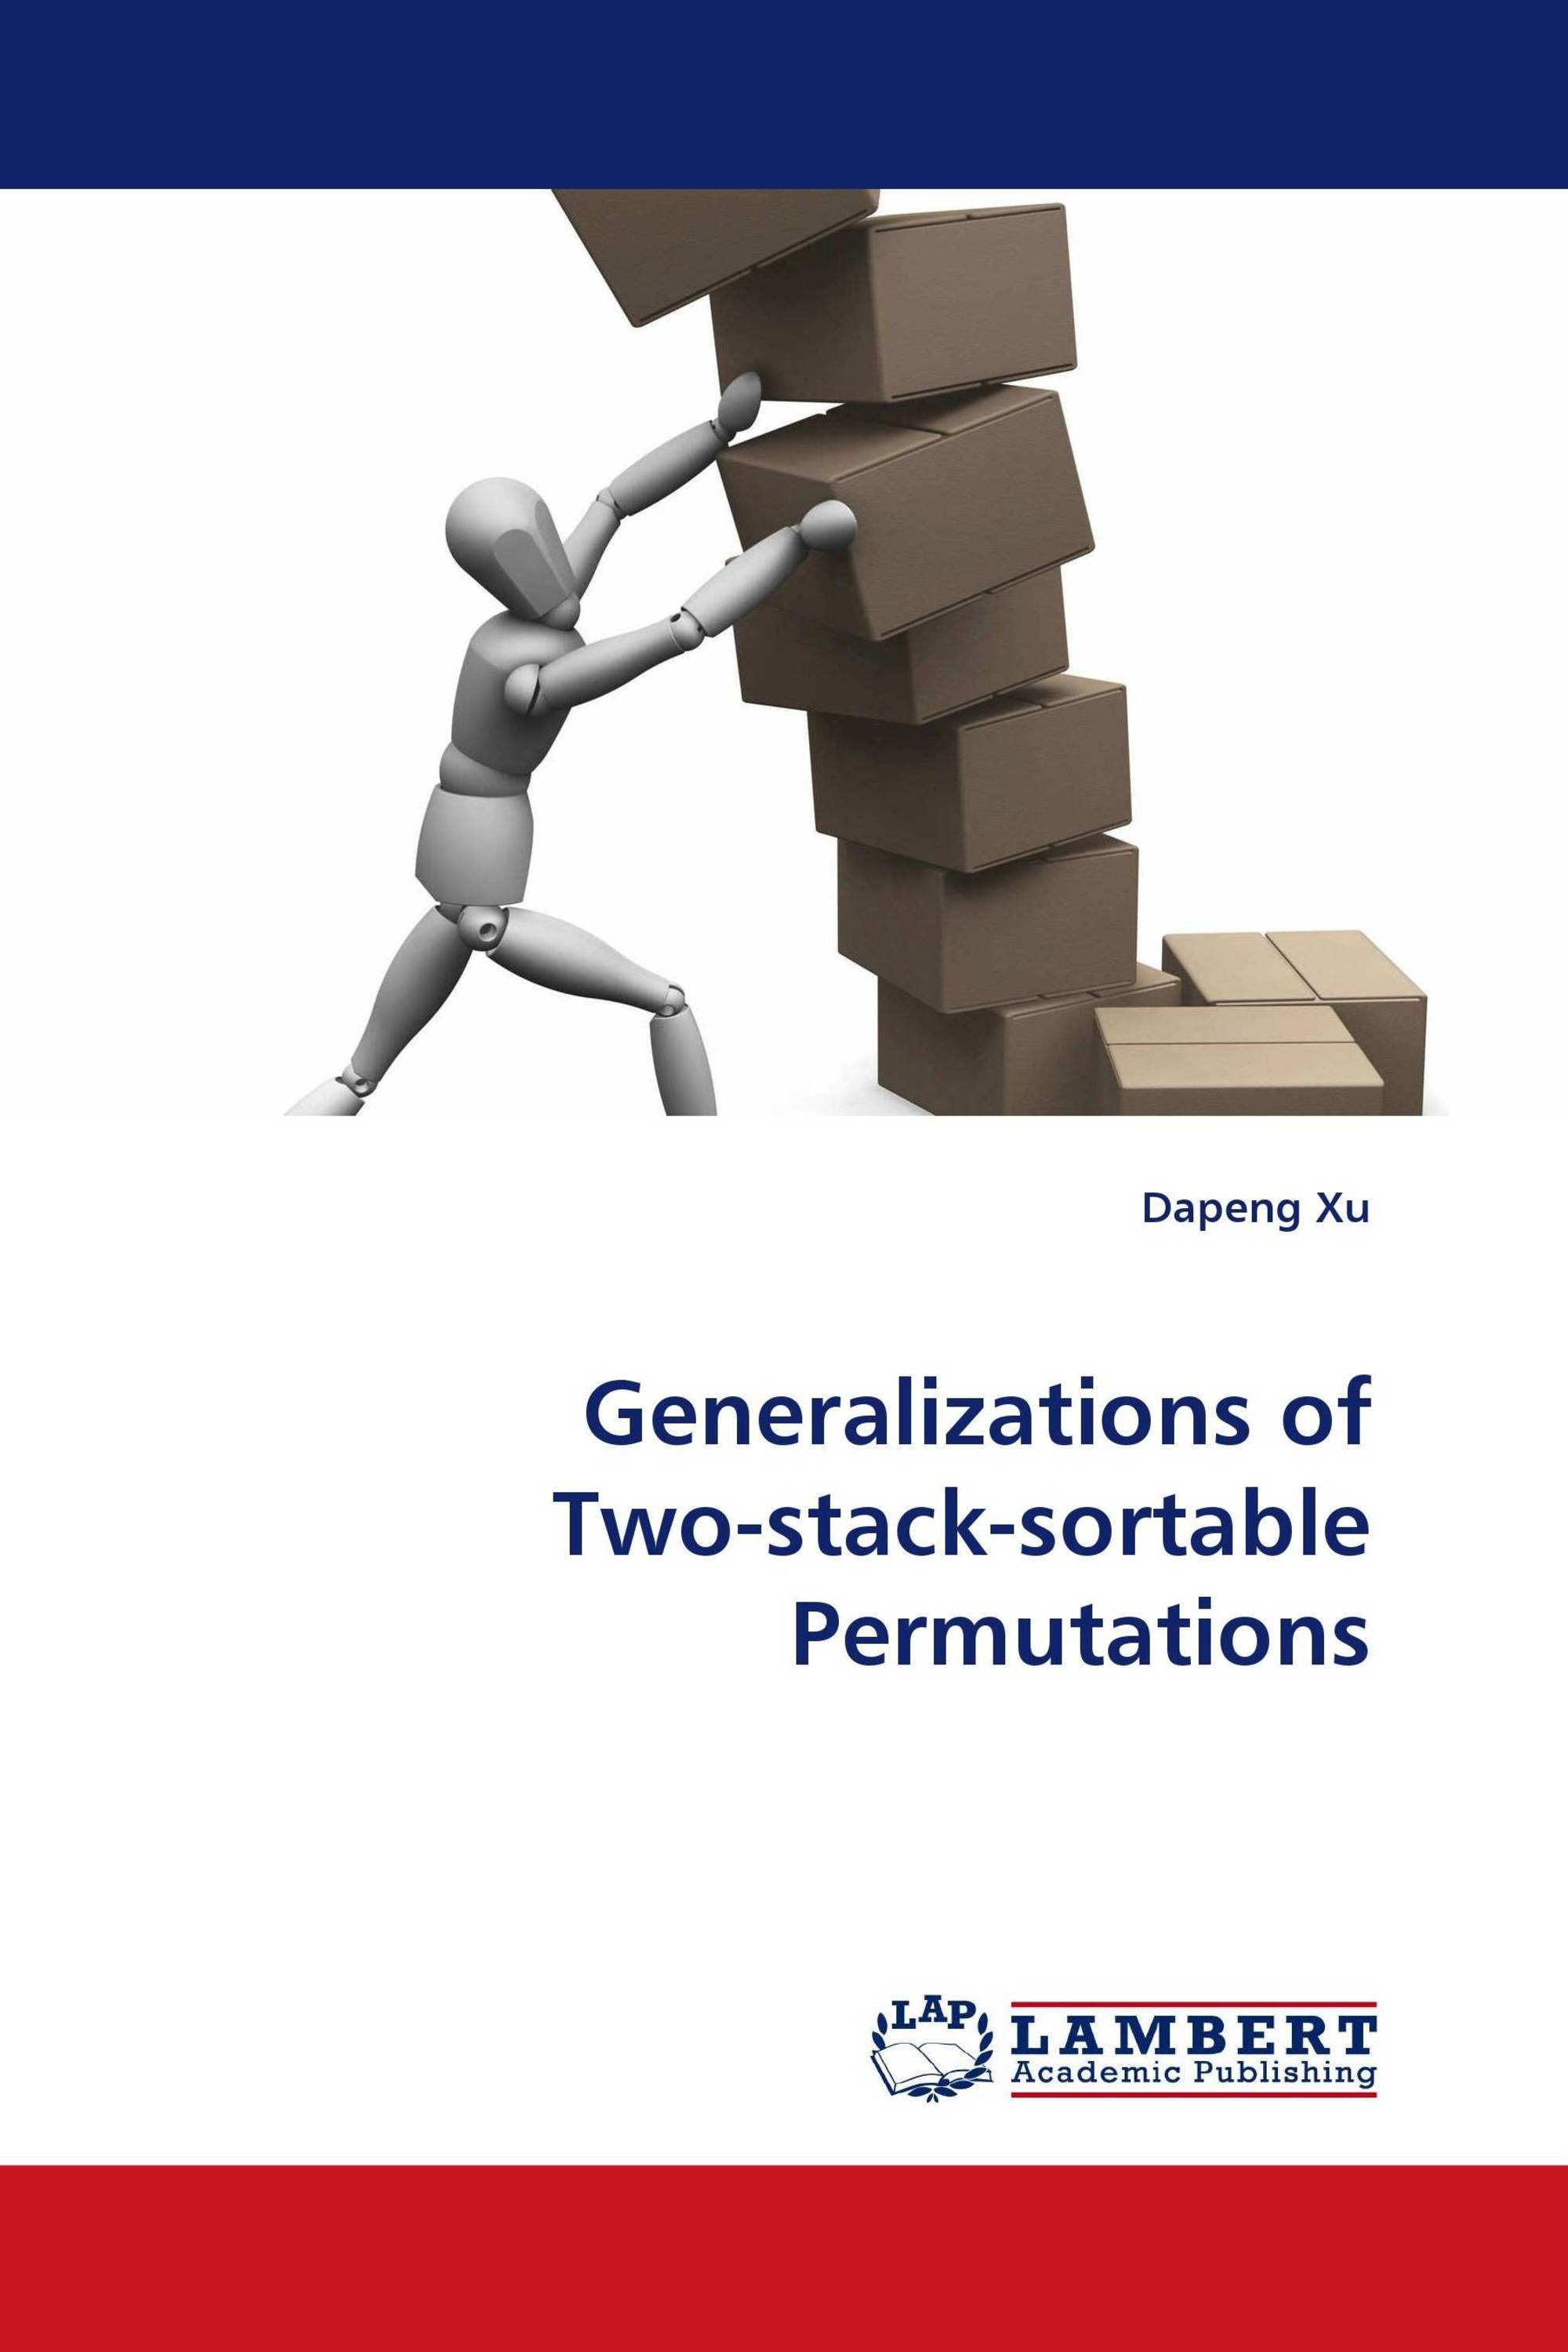 Generalizations of Two-stack-sortable Permutations